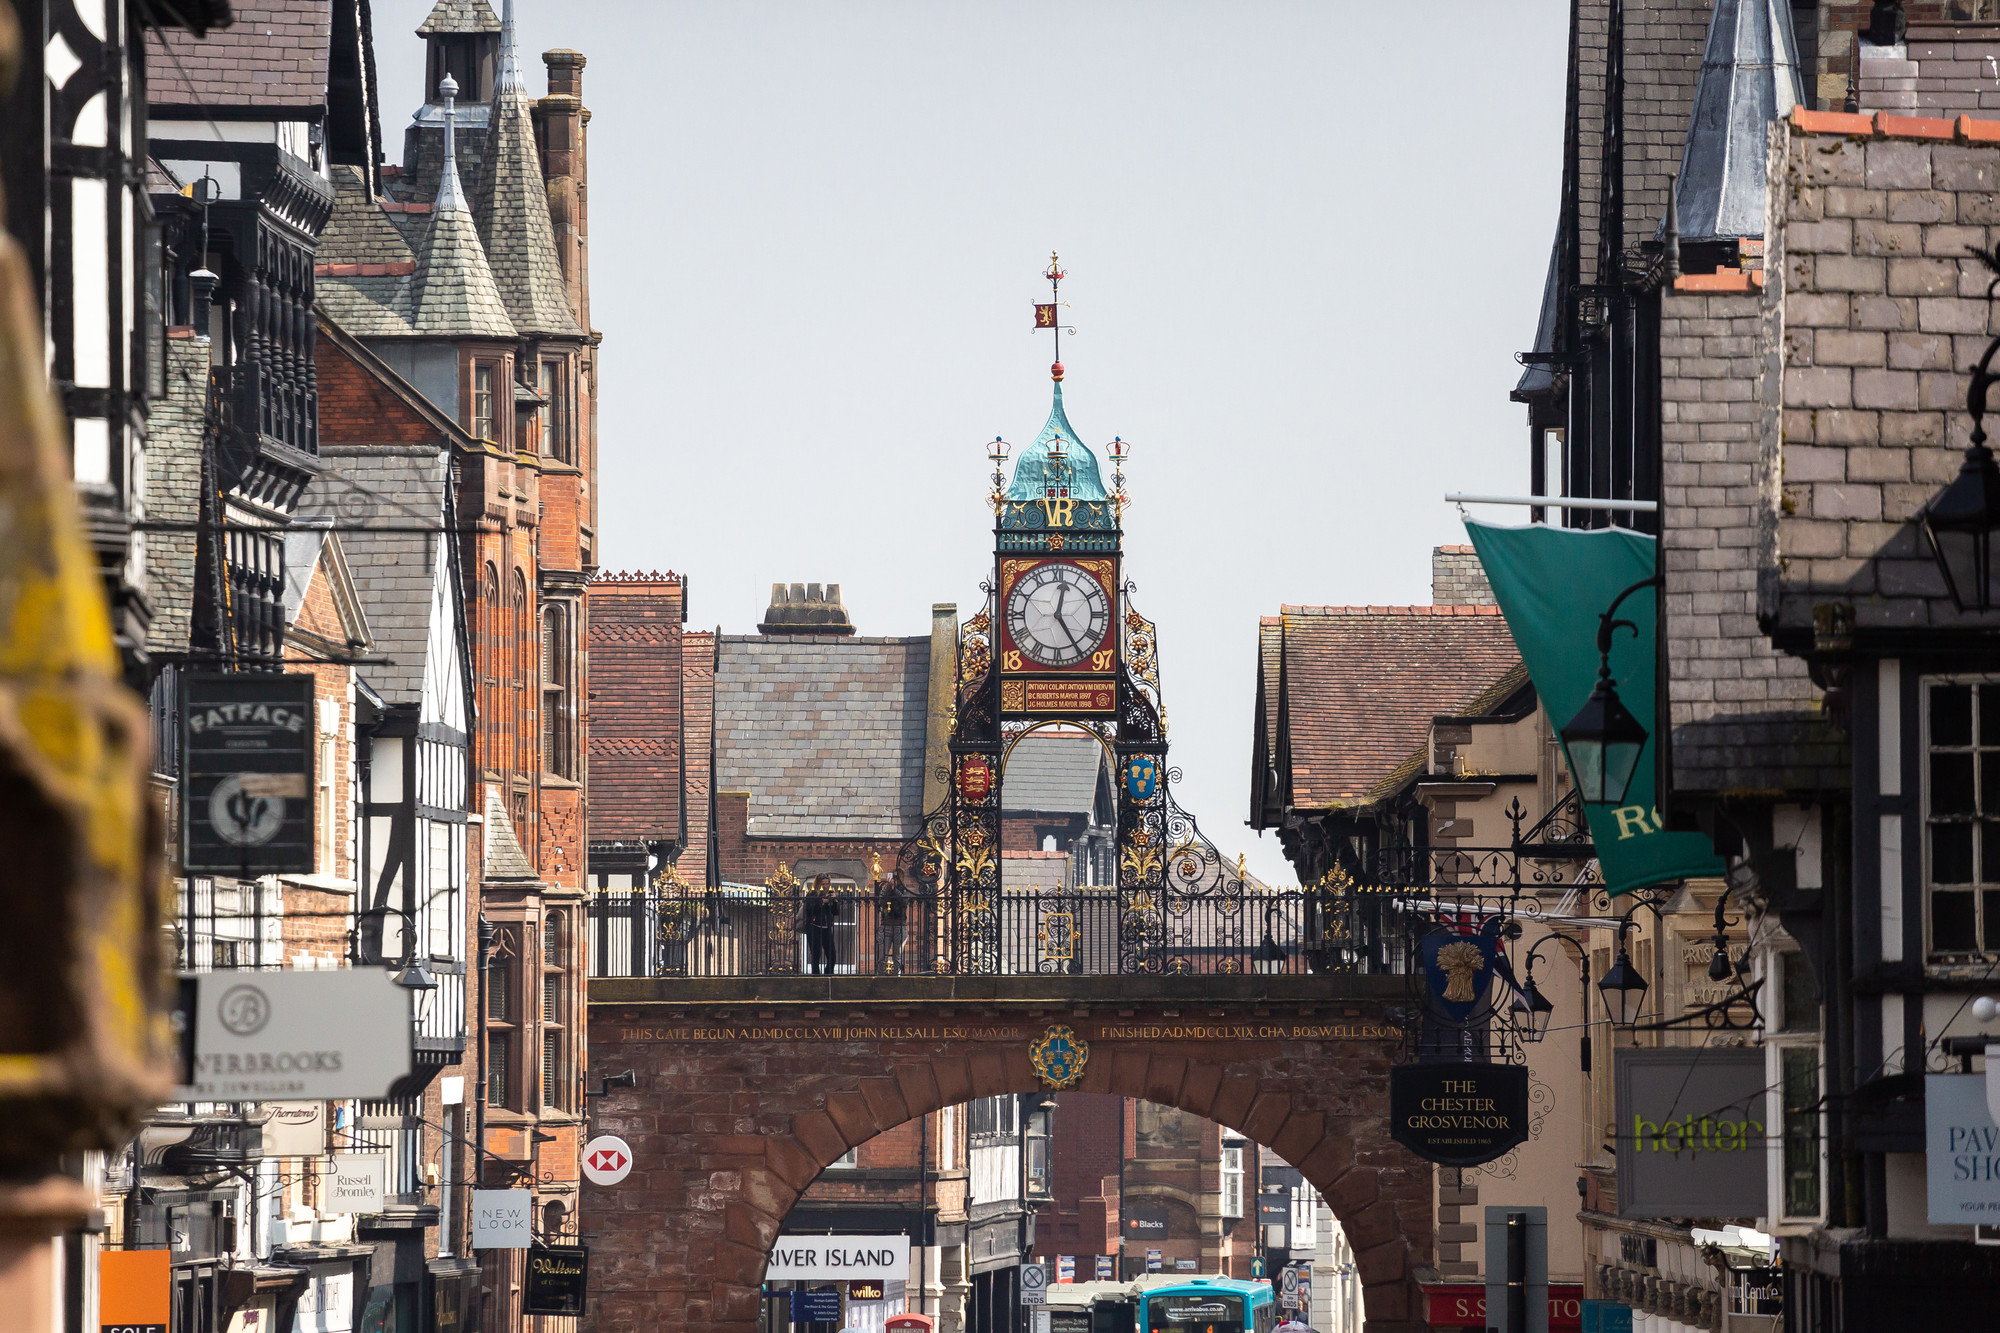 View of the Eastgate Clock in Chester City Centre